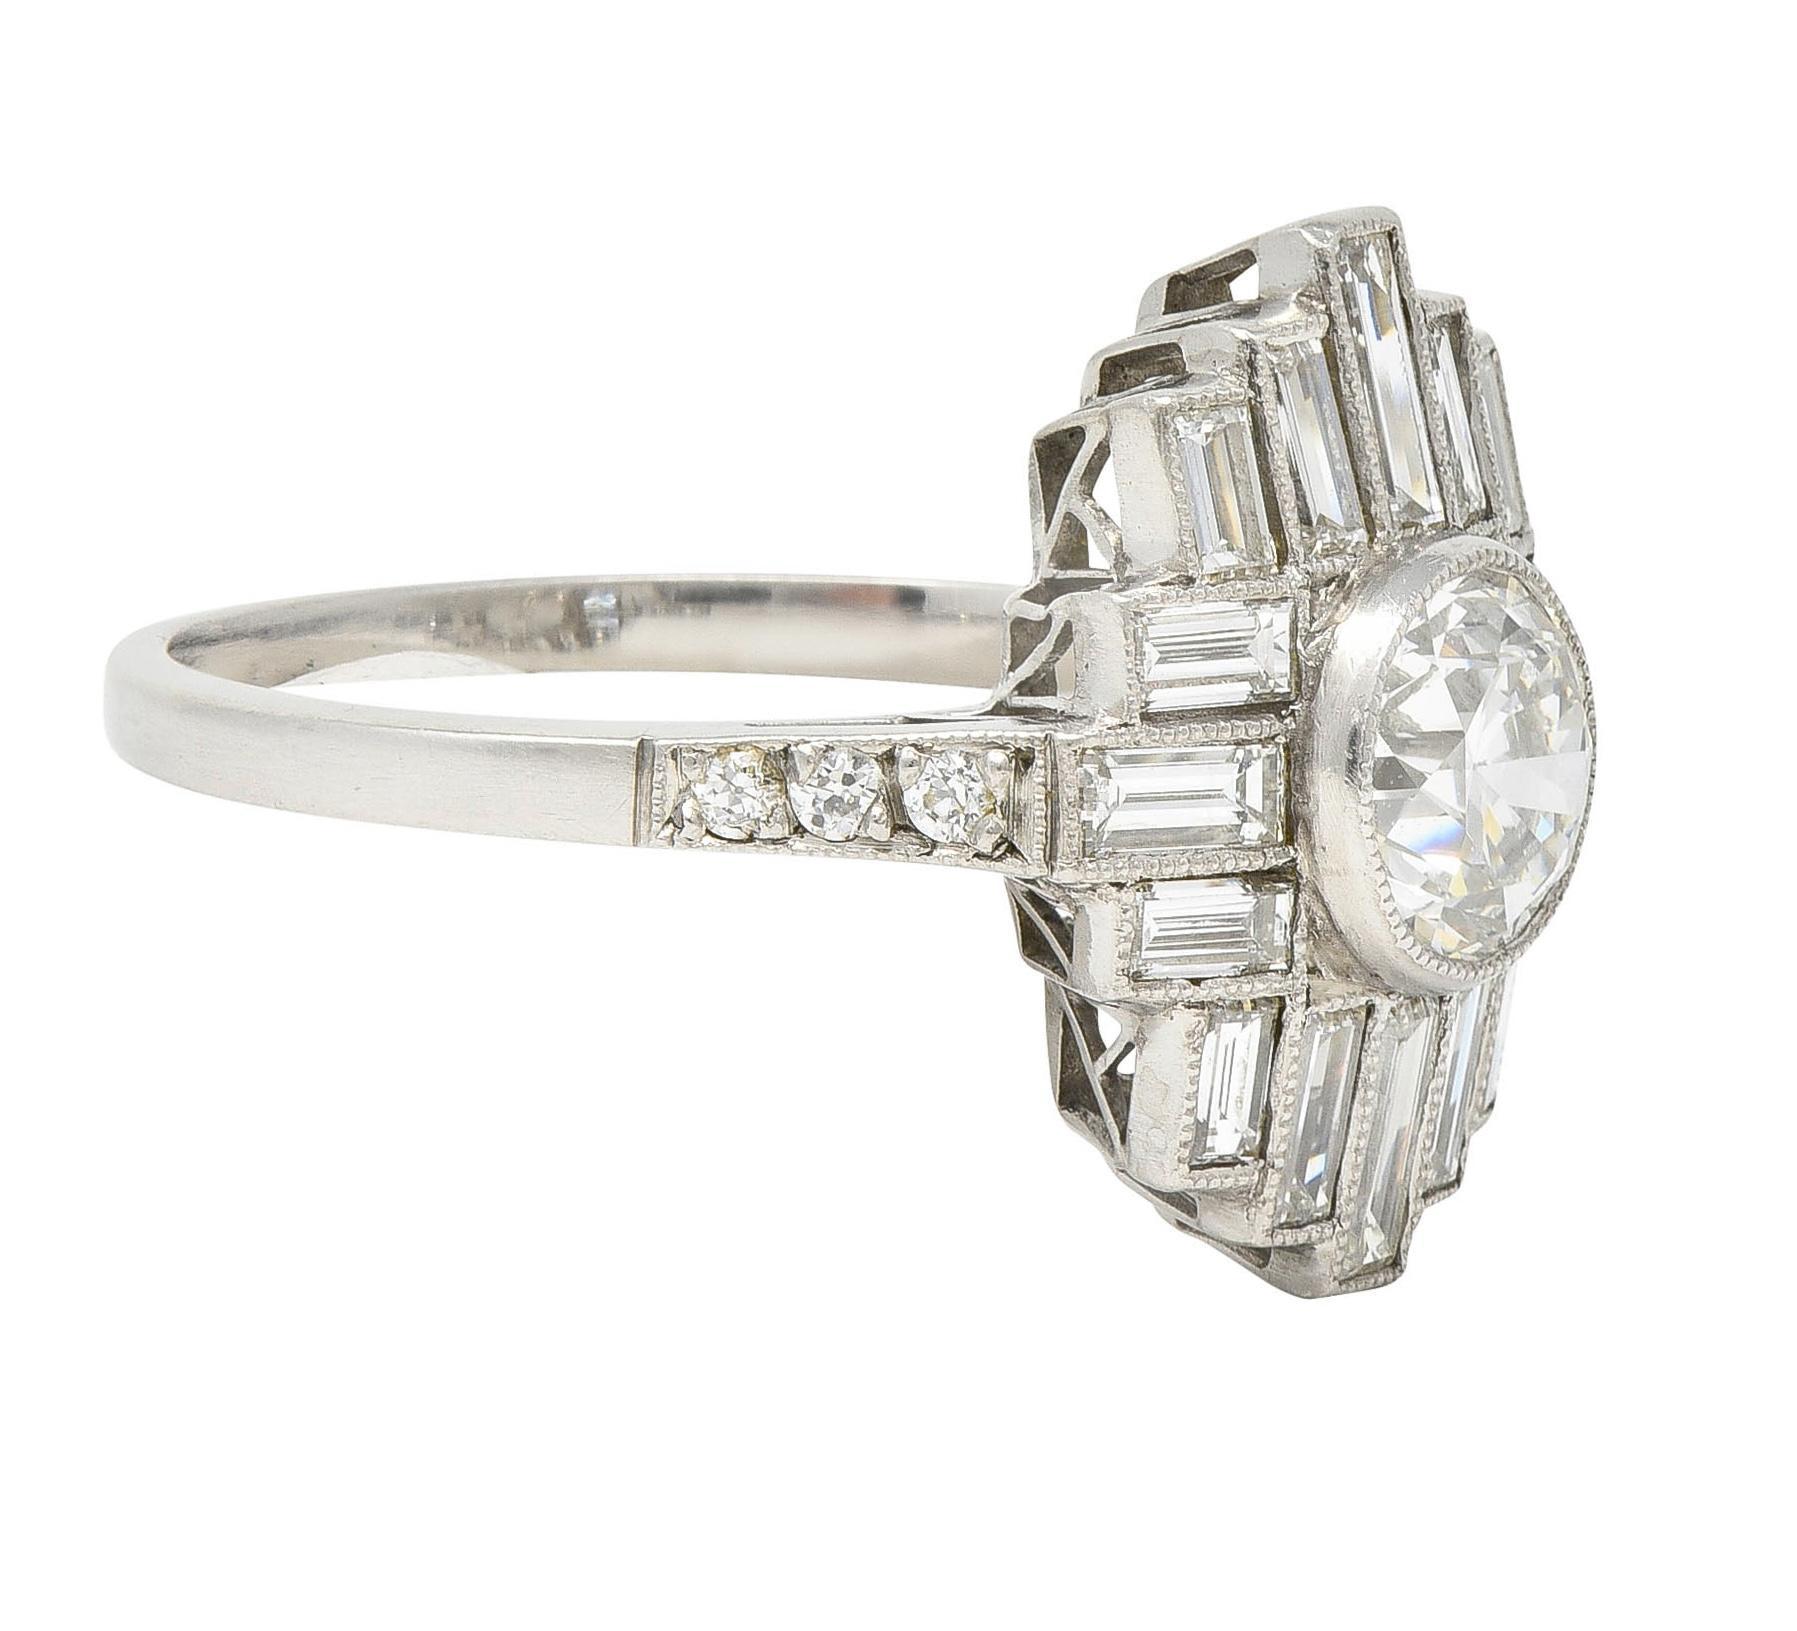 Centering an old European cut diamond weighing approximately 0.99 carat - G color with VS2 clarity
Set in a milgrain bezel with a recessed streamline motif surround of clustered diamonds 
Baguette cut and weighing approximately 1.40 carats total -